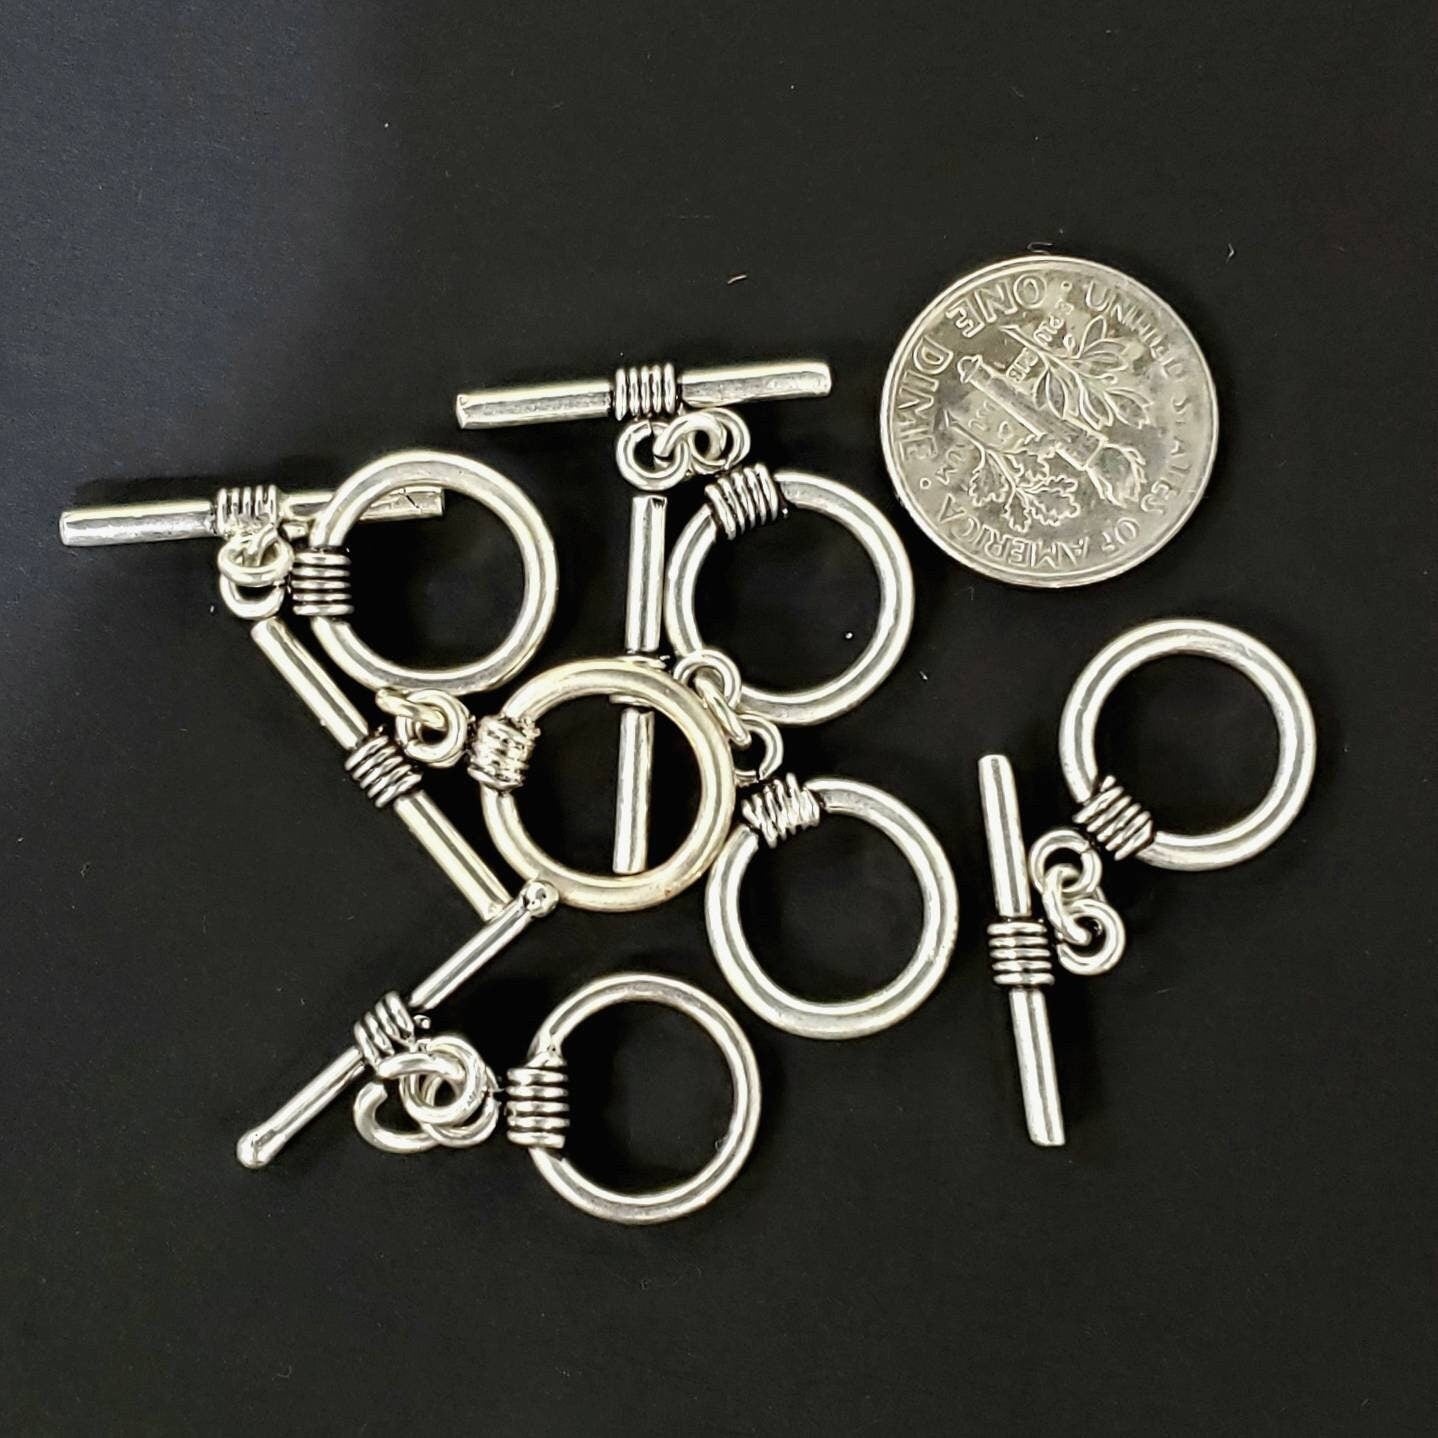 2 sets 925 sterling silver bali toggle clasp 12mm round , jewelry making necklace bracelet clasp.